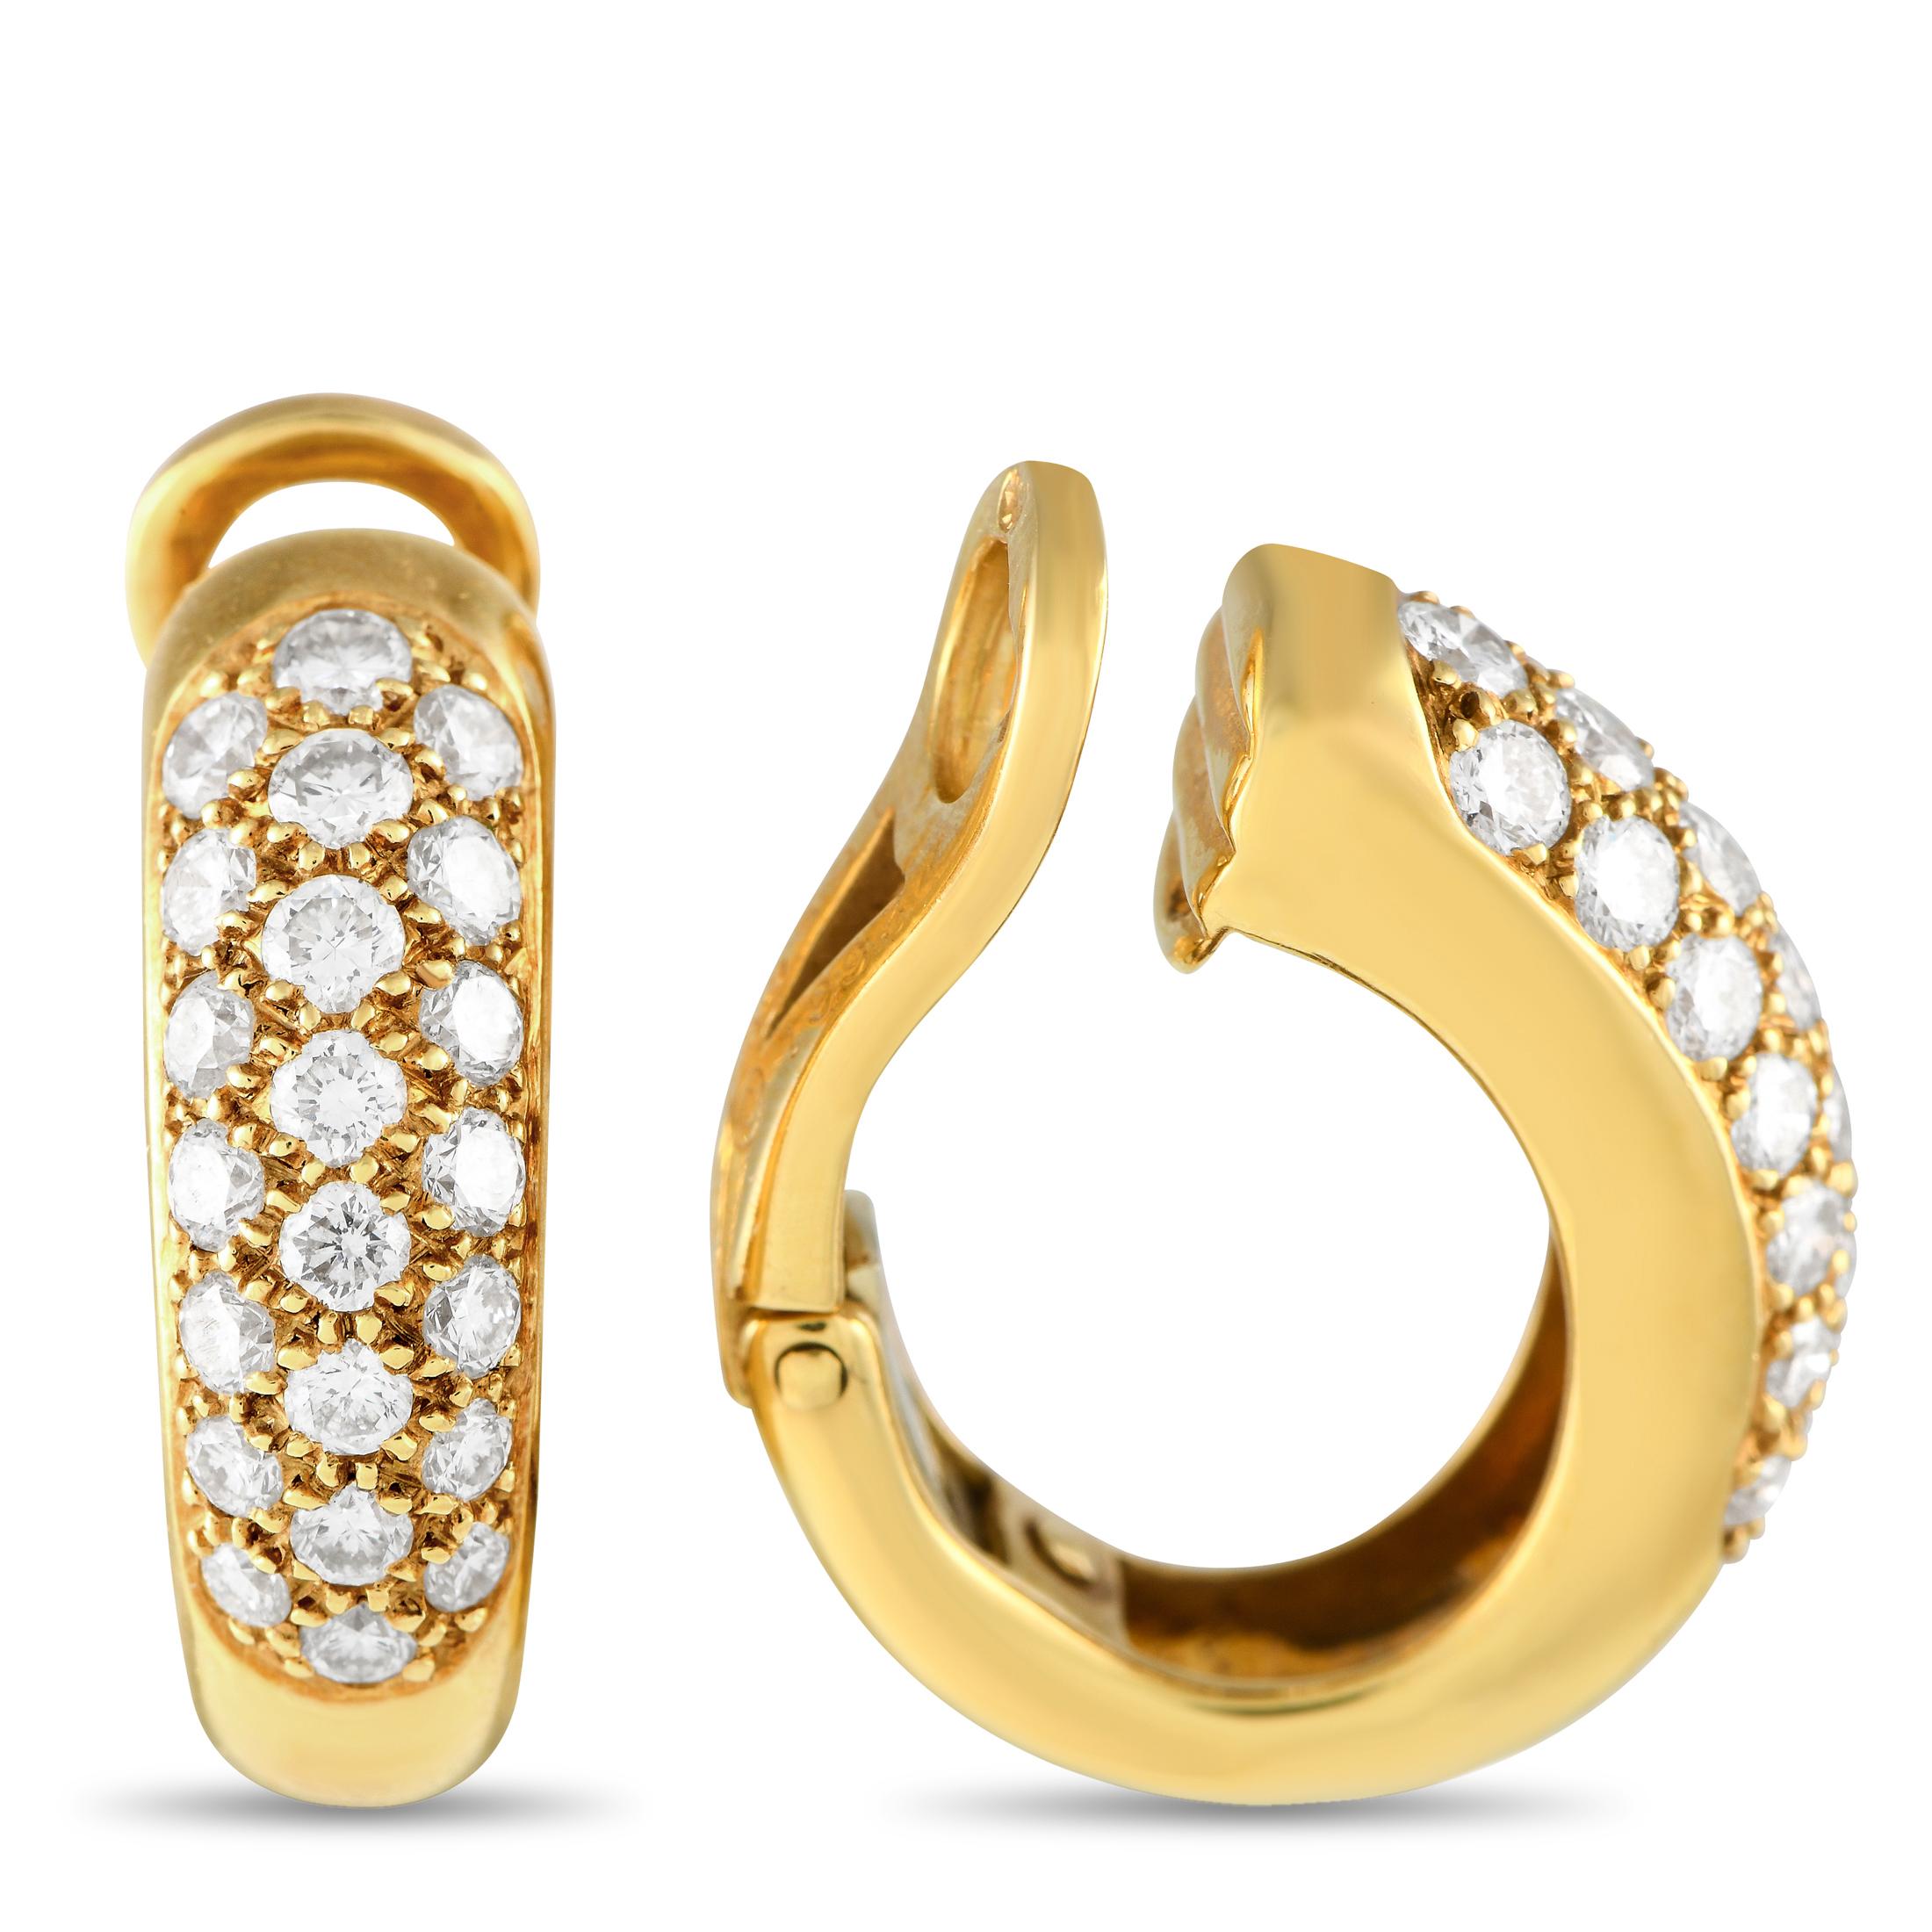 Sparkling Diamonds with a total weight of 1.0 carats allow these Cartier earrings to effortlessly radiate light. The opulent 18K Yellow Gold setting features a gracefully curved design that is undeniably timeless. Each earring measures .75 long,